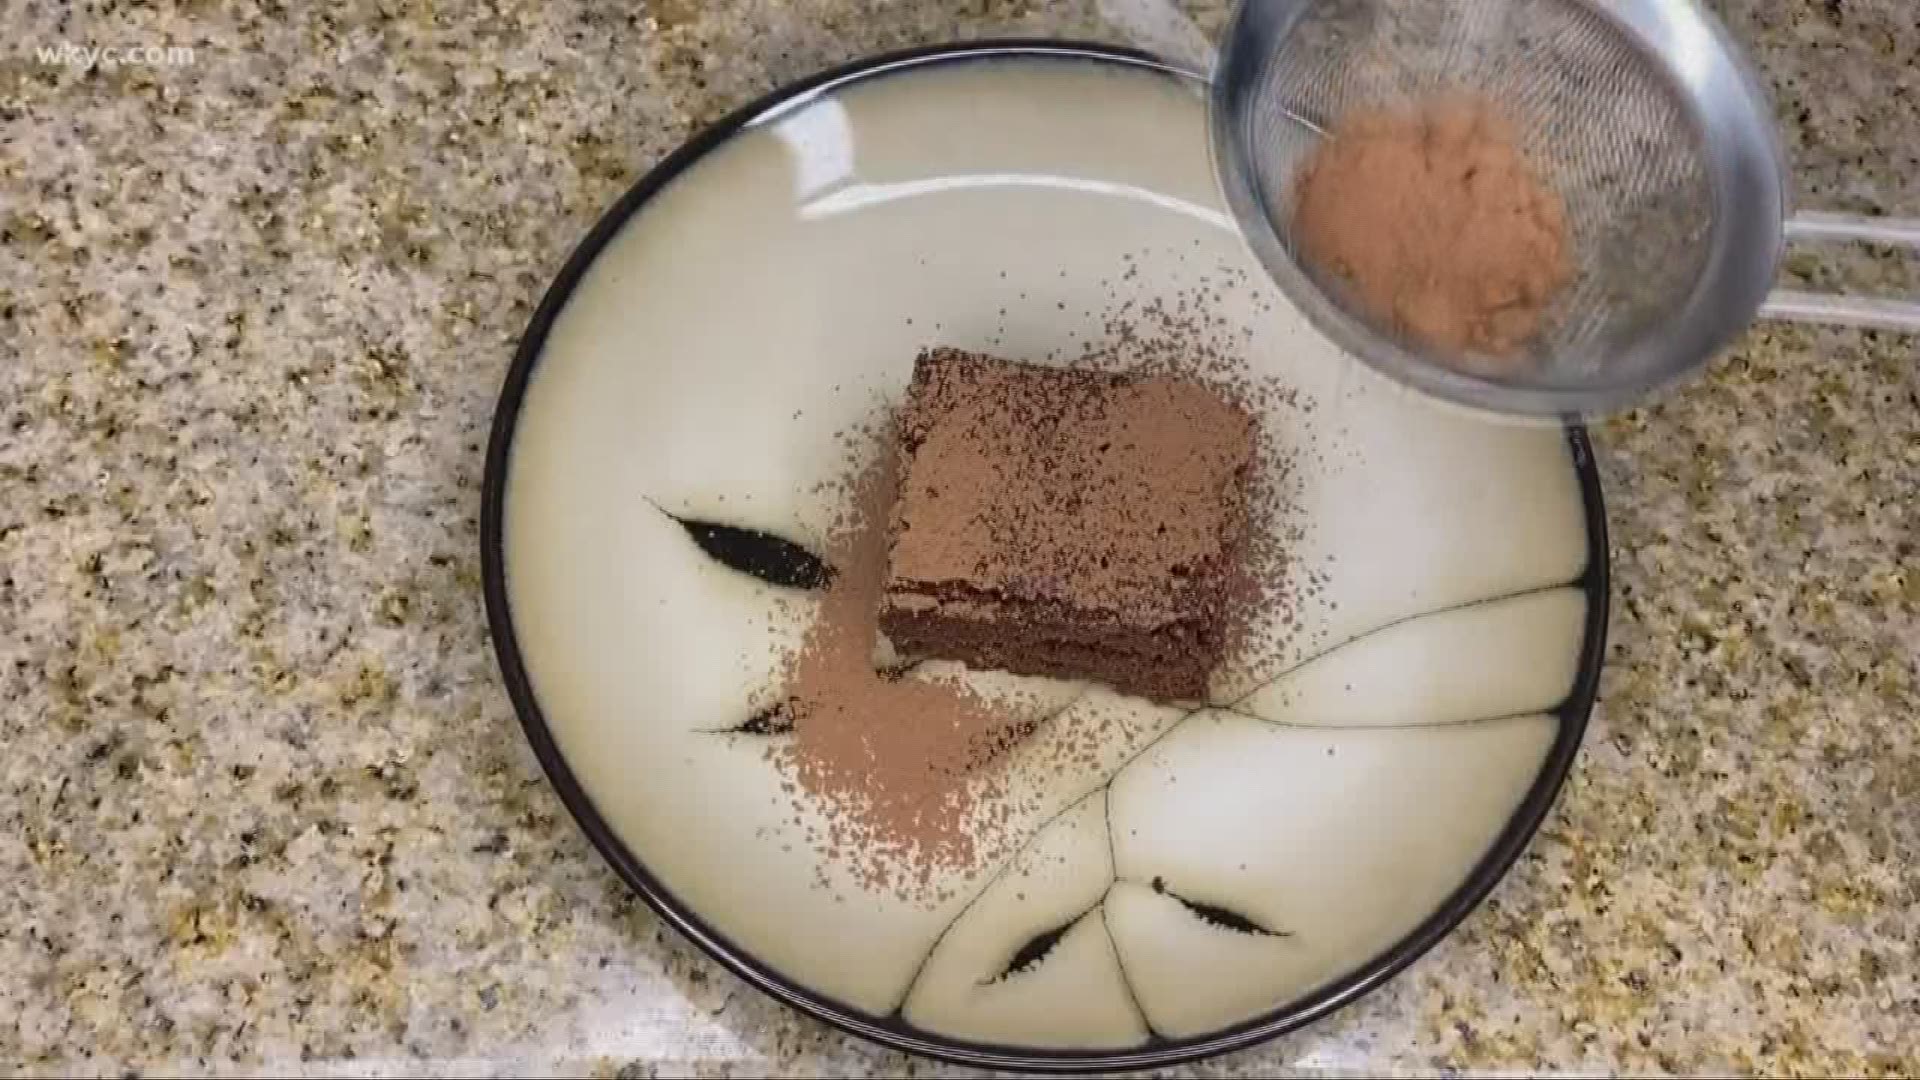 While stuck inside, why not try some new recipes. 3News' Amani Abraham tried Fran DeWine's brownie recipe.